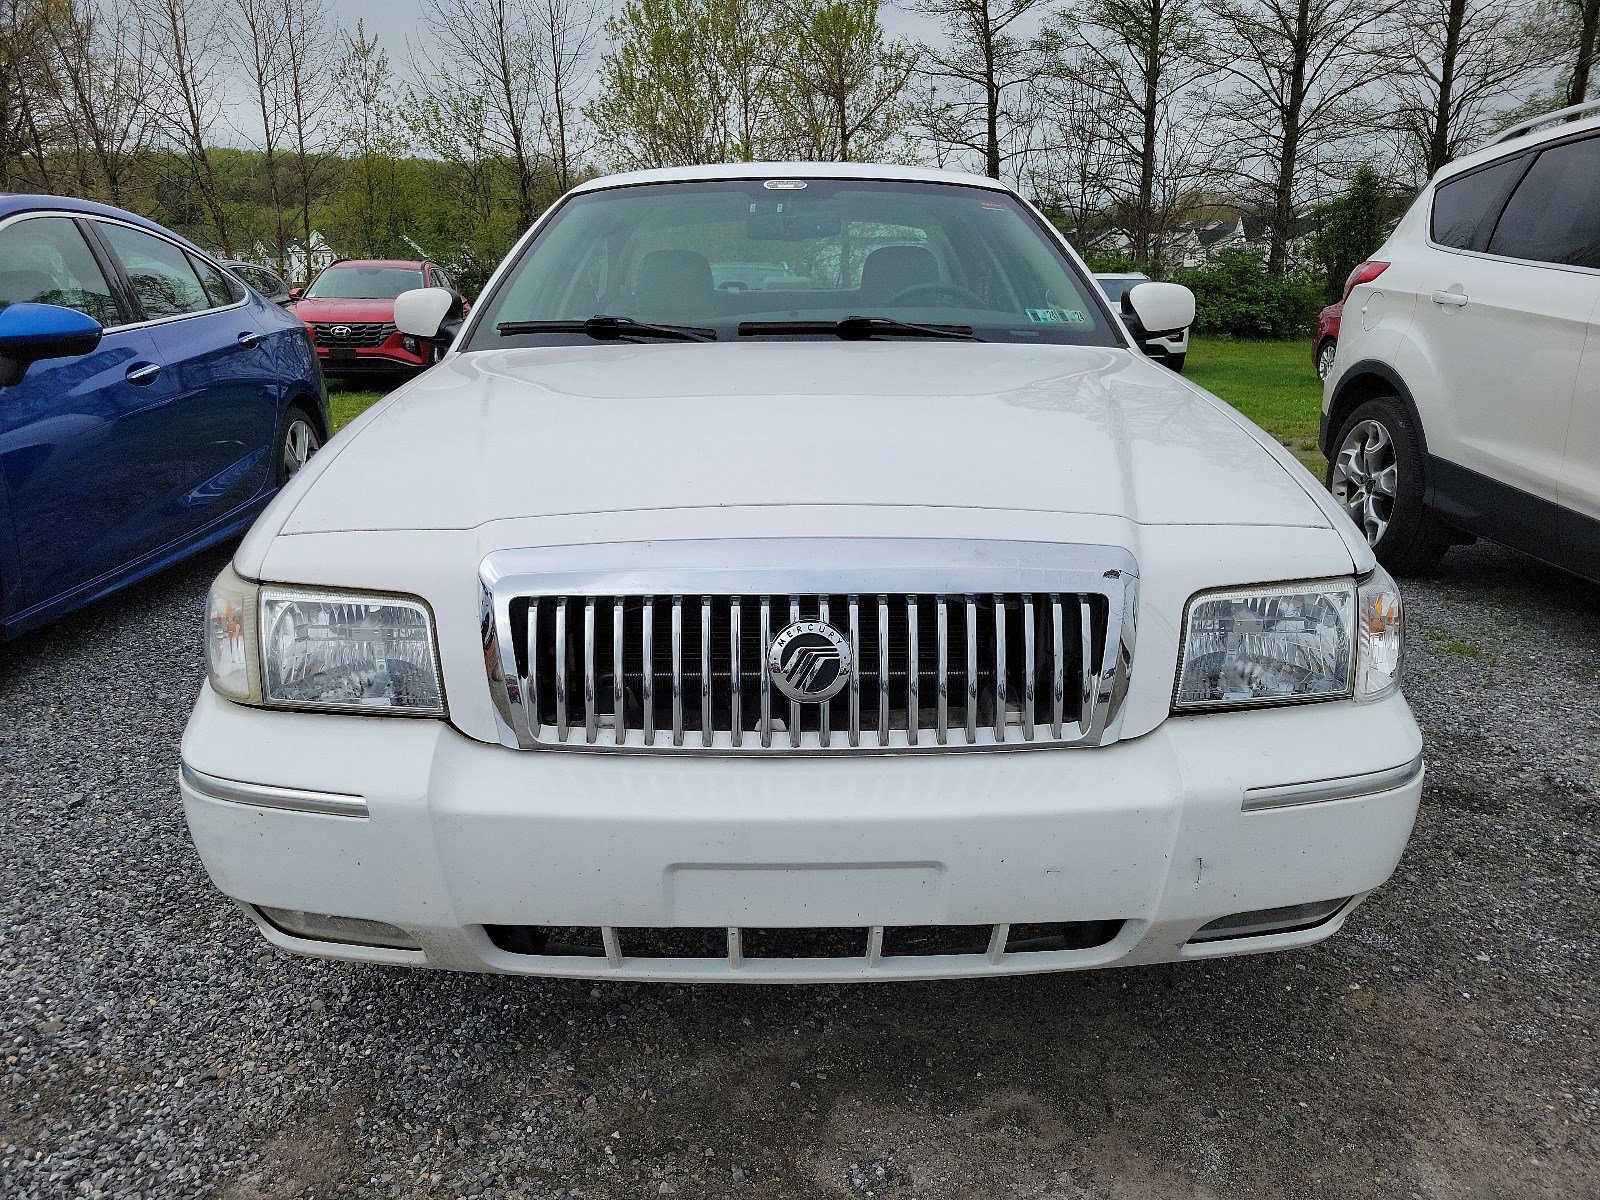 Used 2007 Mercury Grand Marquis LS with VIN 2MEFM75VX7X629934 for sale in Exton, PA